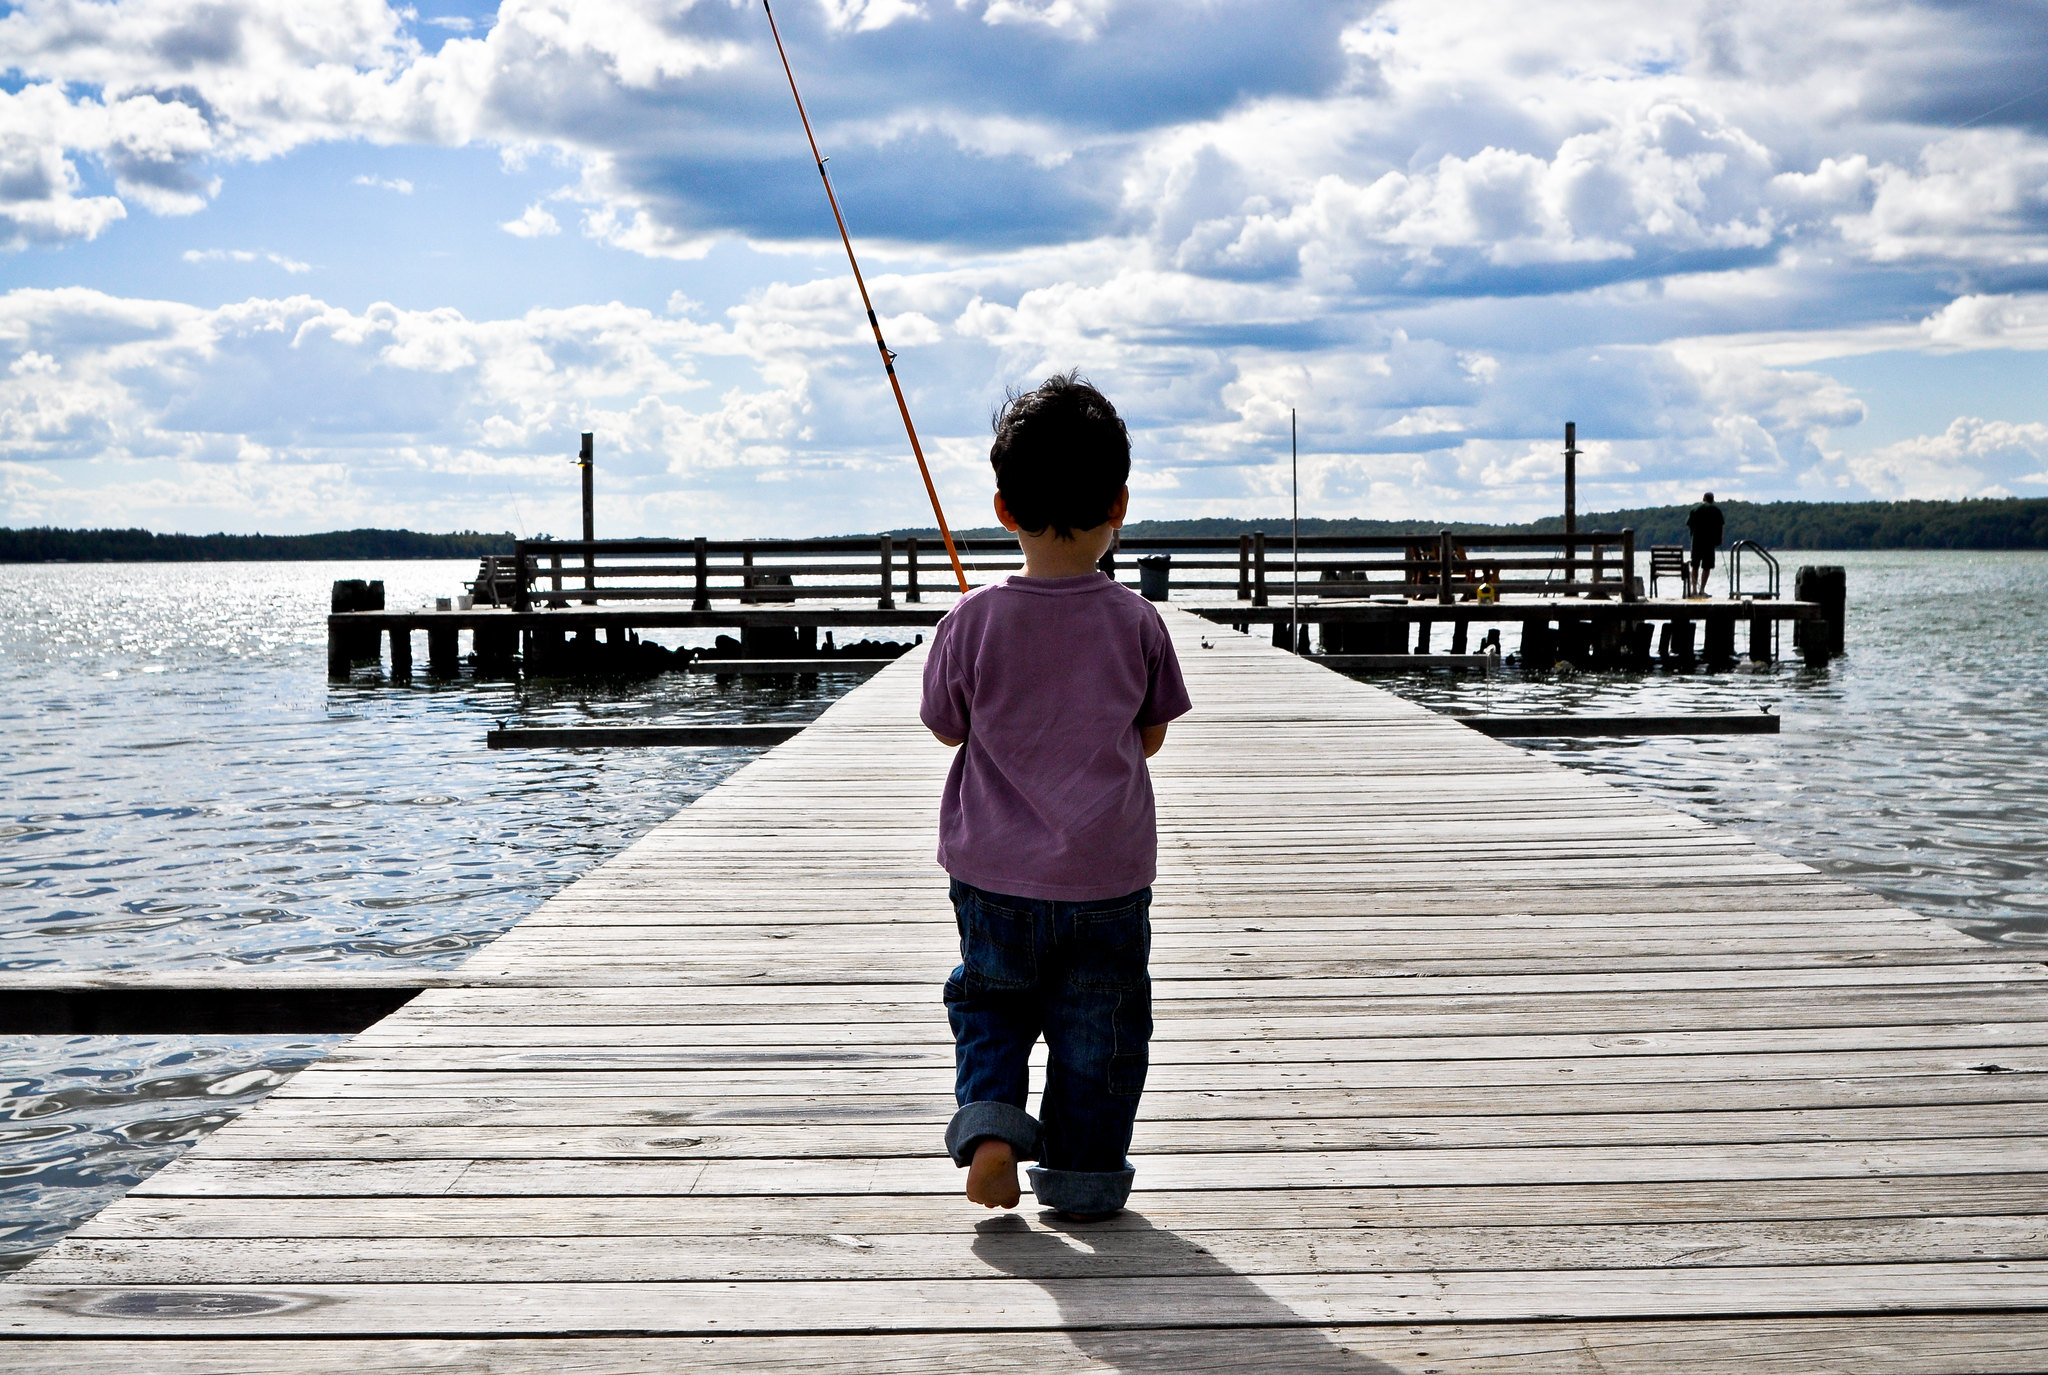 Small boy walking on dock with fishing pole.